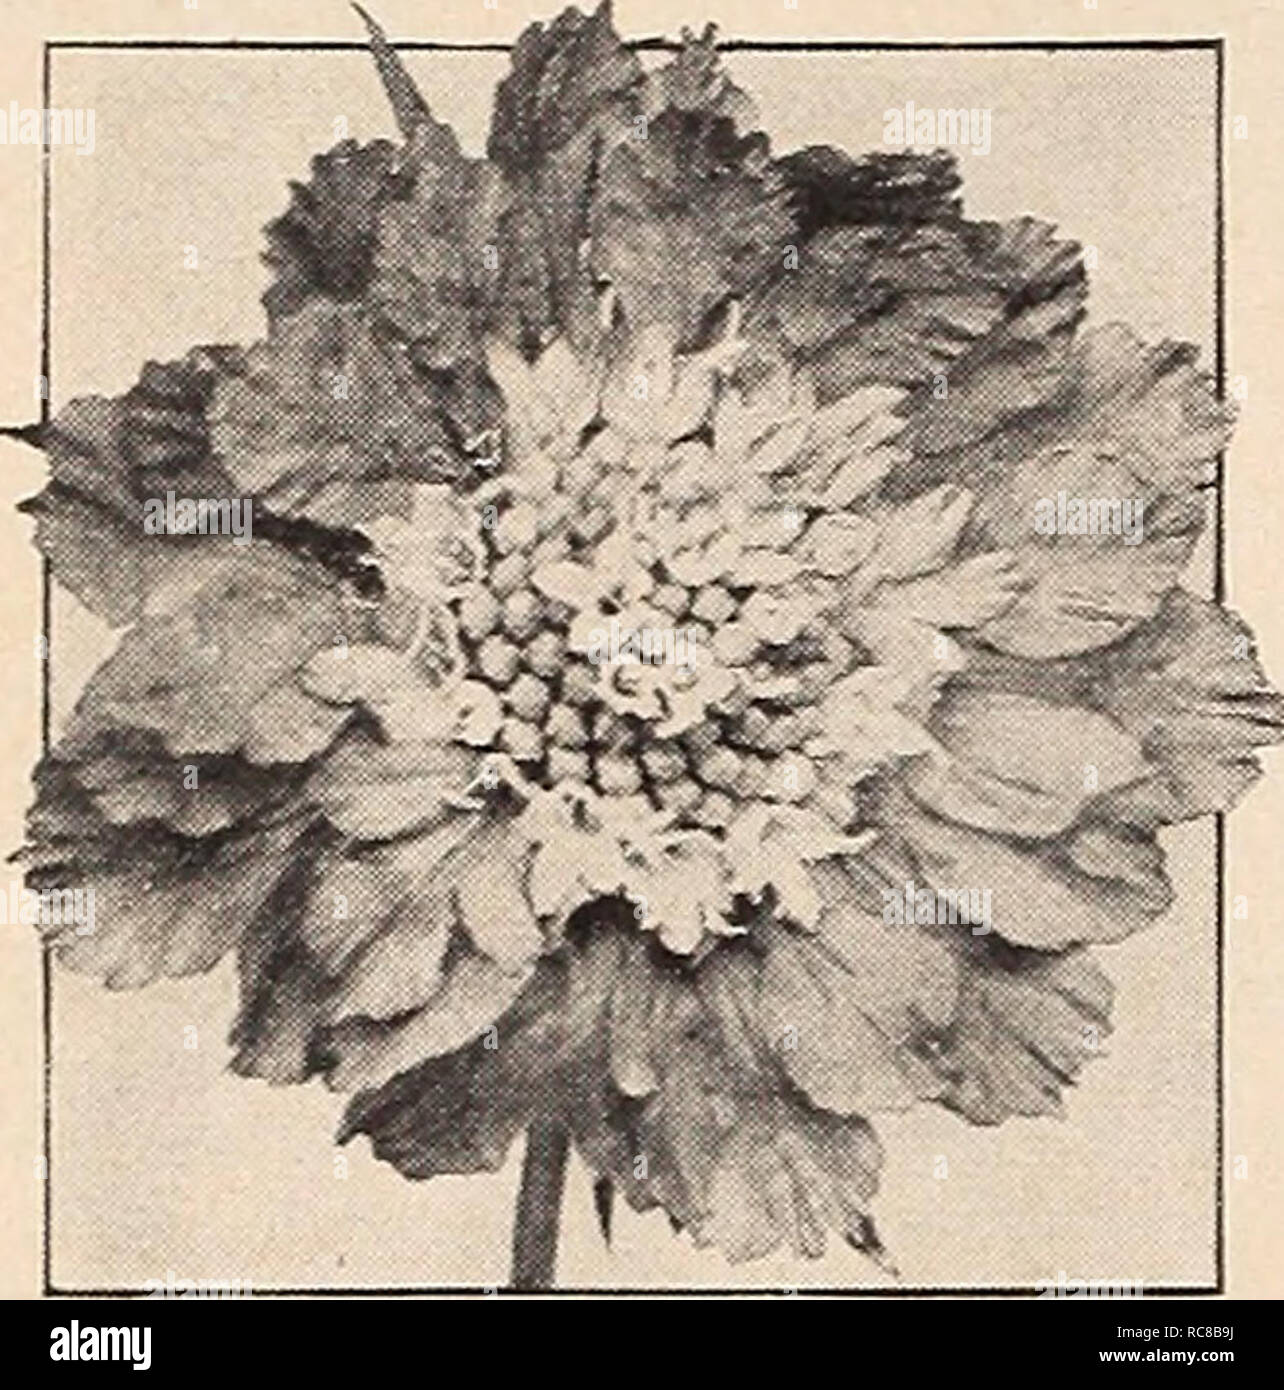 . Dreer's garden book for 1941. Seeds Catalogs; Nursery stock Catalogs; Gardening Equipment and supplies Catalogs; Flowers Seeds Catalogs; Vegetables Seeds Catalogs; Fruit Seeds Catalogs. Dreer's Reliable FLOWER SEEDS Large-Flowering Scabiosa Mixed. Scabiosa caucasica, Giant Hybrids Saponaria ® &amp;n Soapwort 3867 Ocymoides, Brilliant. |hp] A Covered all summer long with small bright rose blooms. 9 in. tall. Pkt. 10c; large pkt. 25c; J oz. 40c. 3869 Vaccaria, Rose. ® A very pretty annual 2 feet tall bearing great masses of showy satiny pink flowers not unlike a glorified Gypsophila. Blooms al Stock Photo